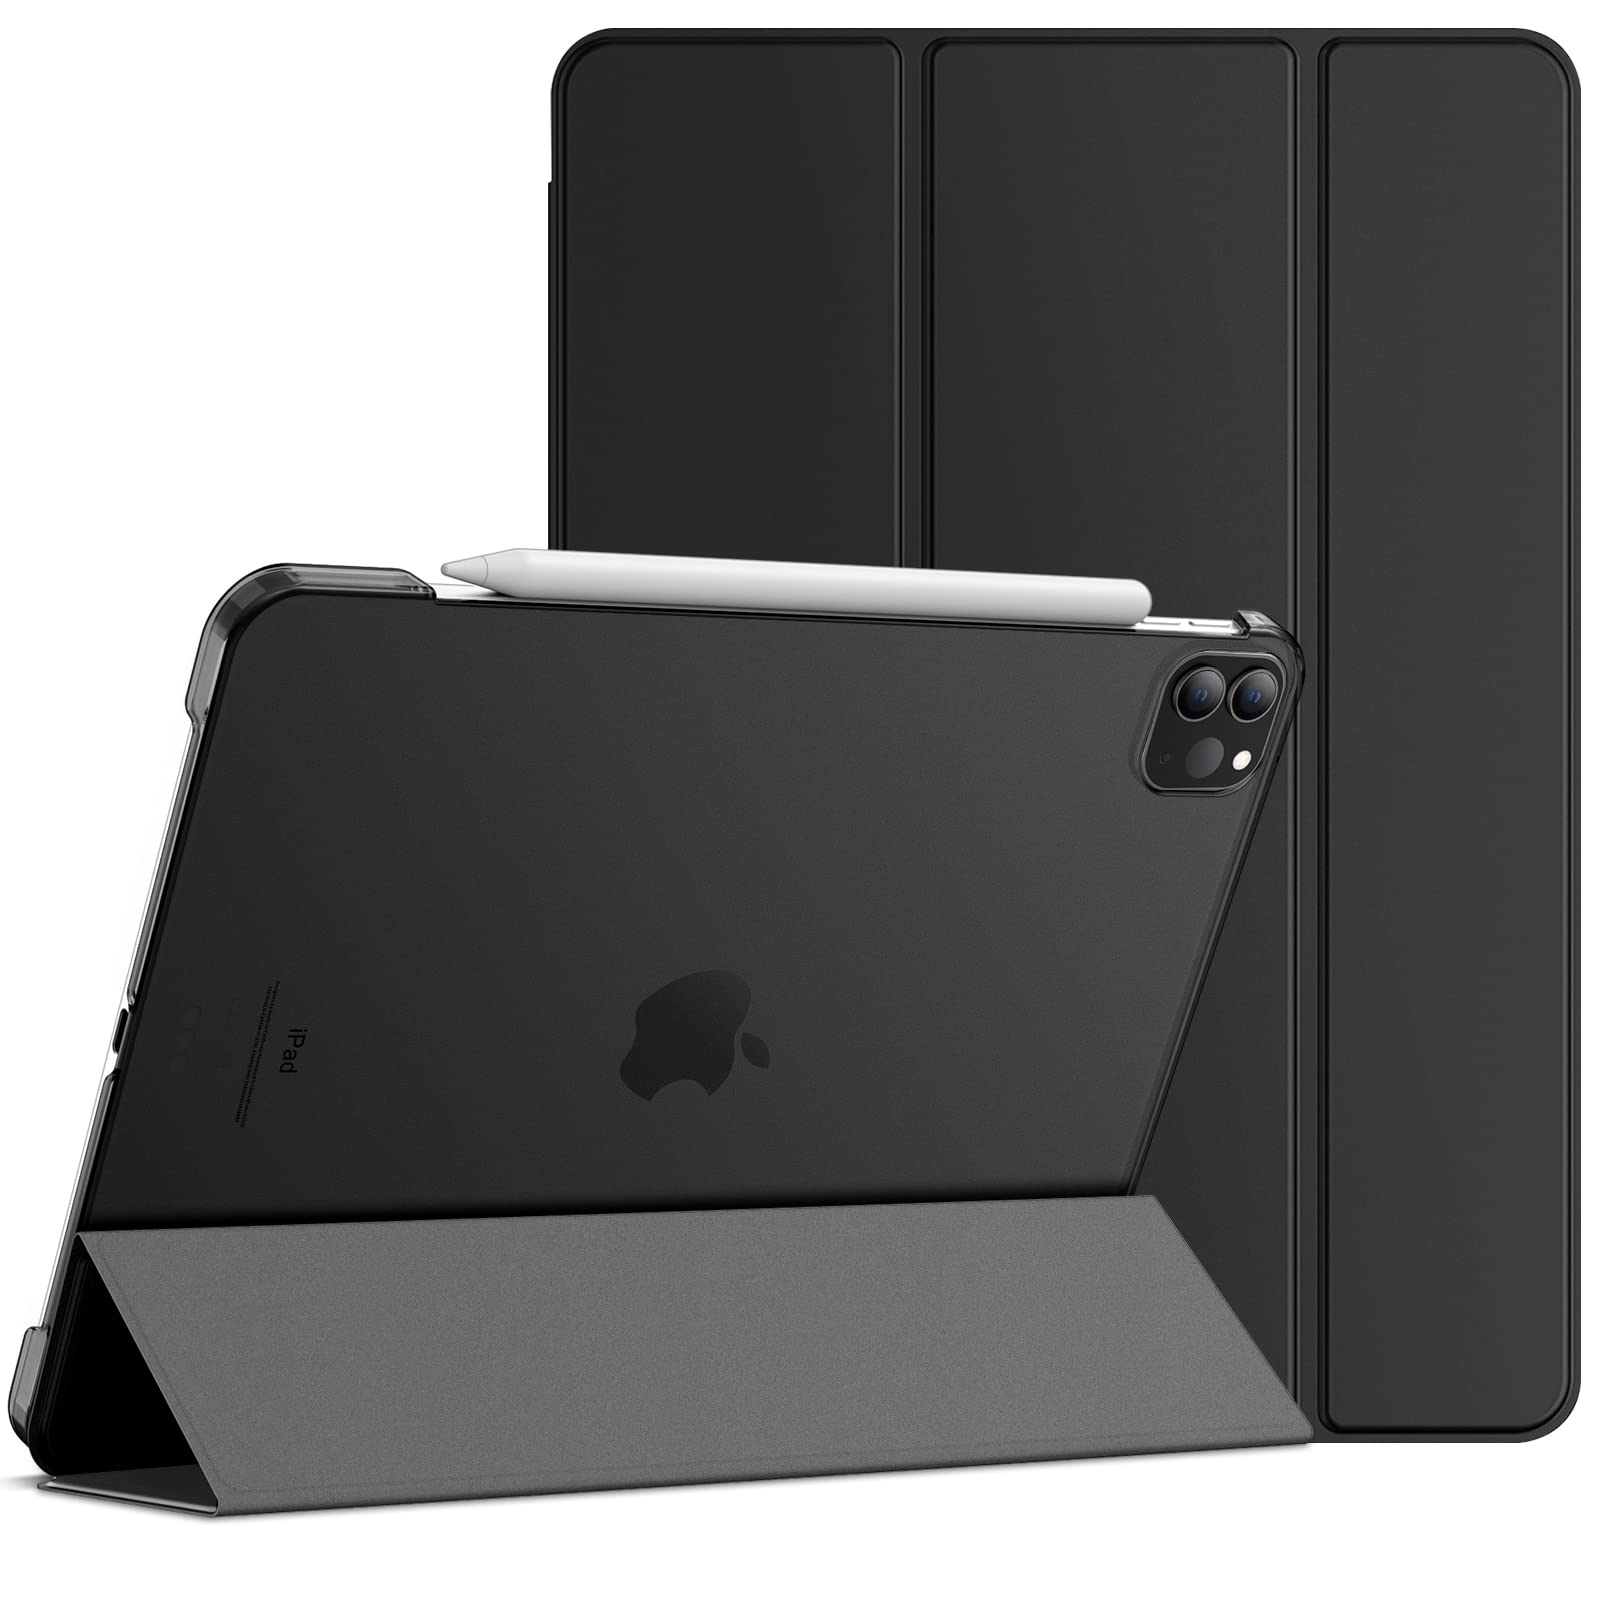 Book Cover JETech Case for iPad Pro 11-Inch, 2022/2021/2020/2018 Model (4th/3rd/2nd/1st Generation), Compatible with Pencil, Cover Auto Wake/Sleep (Black)